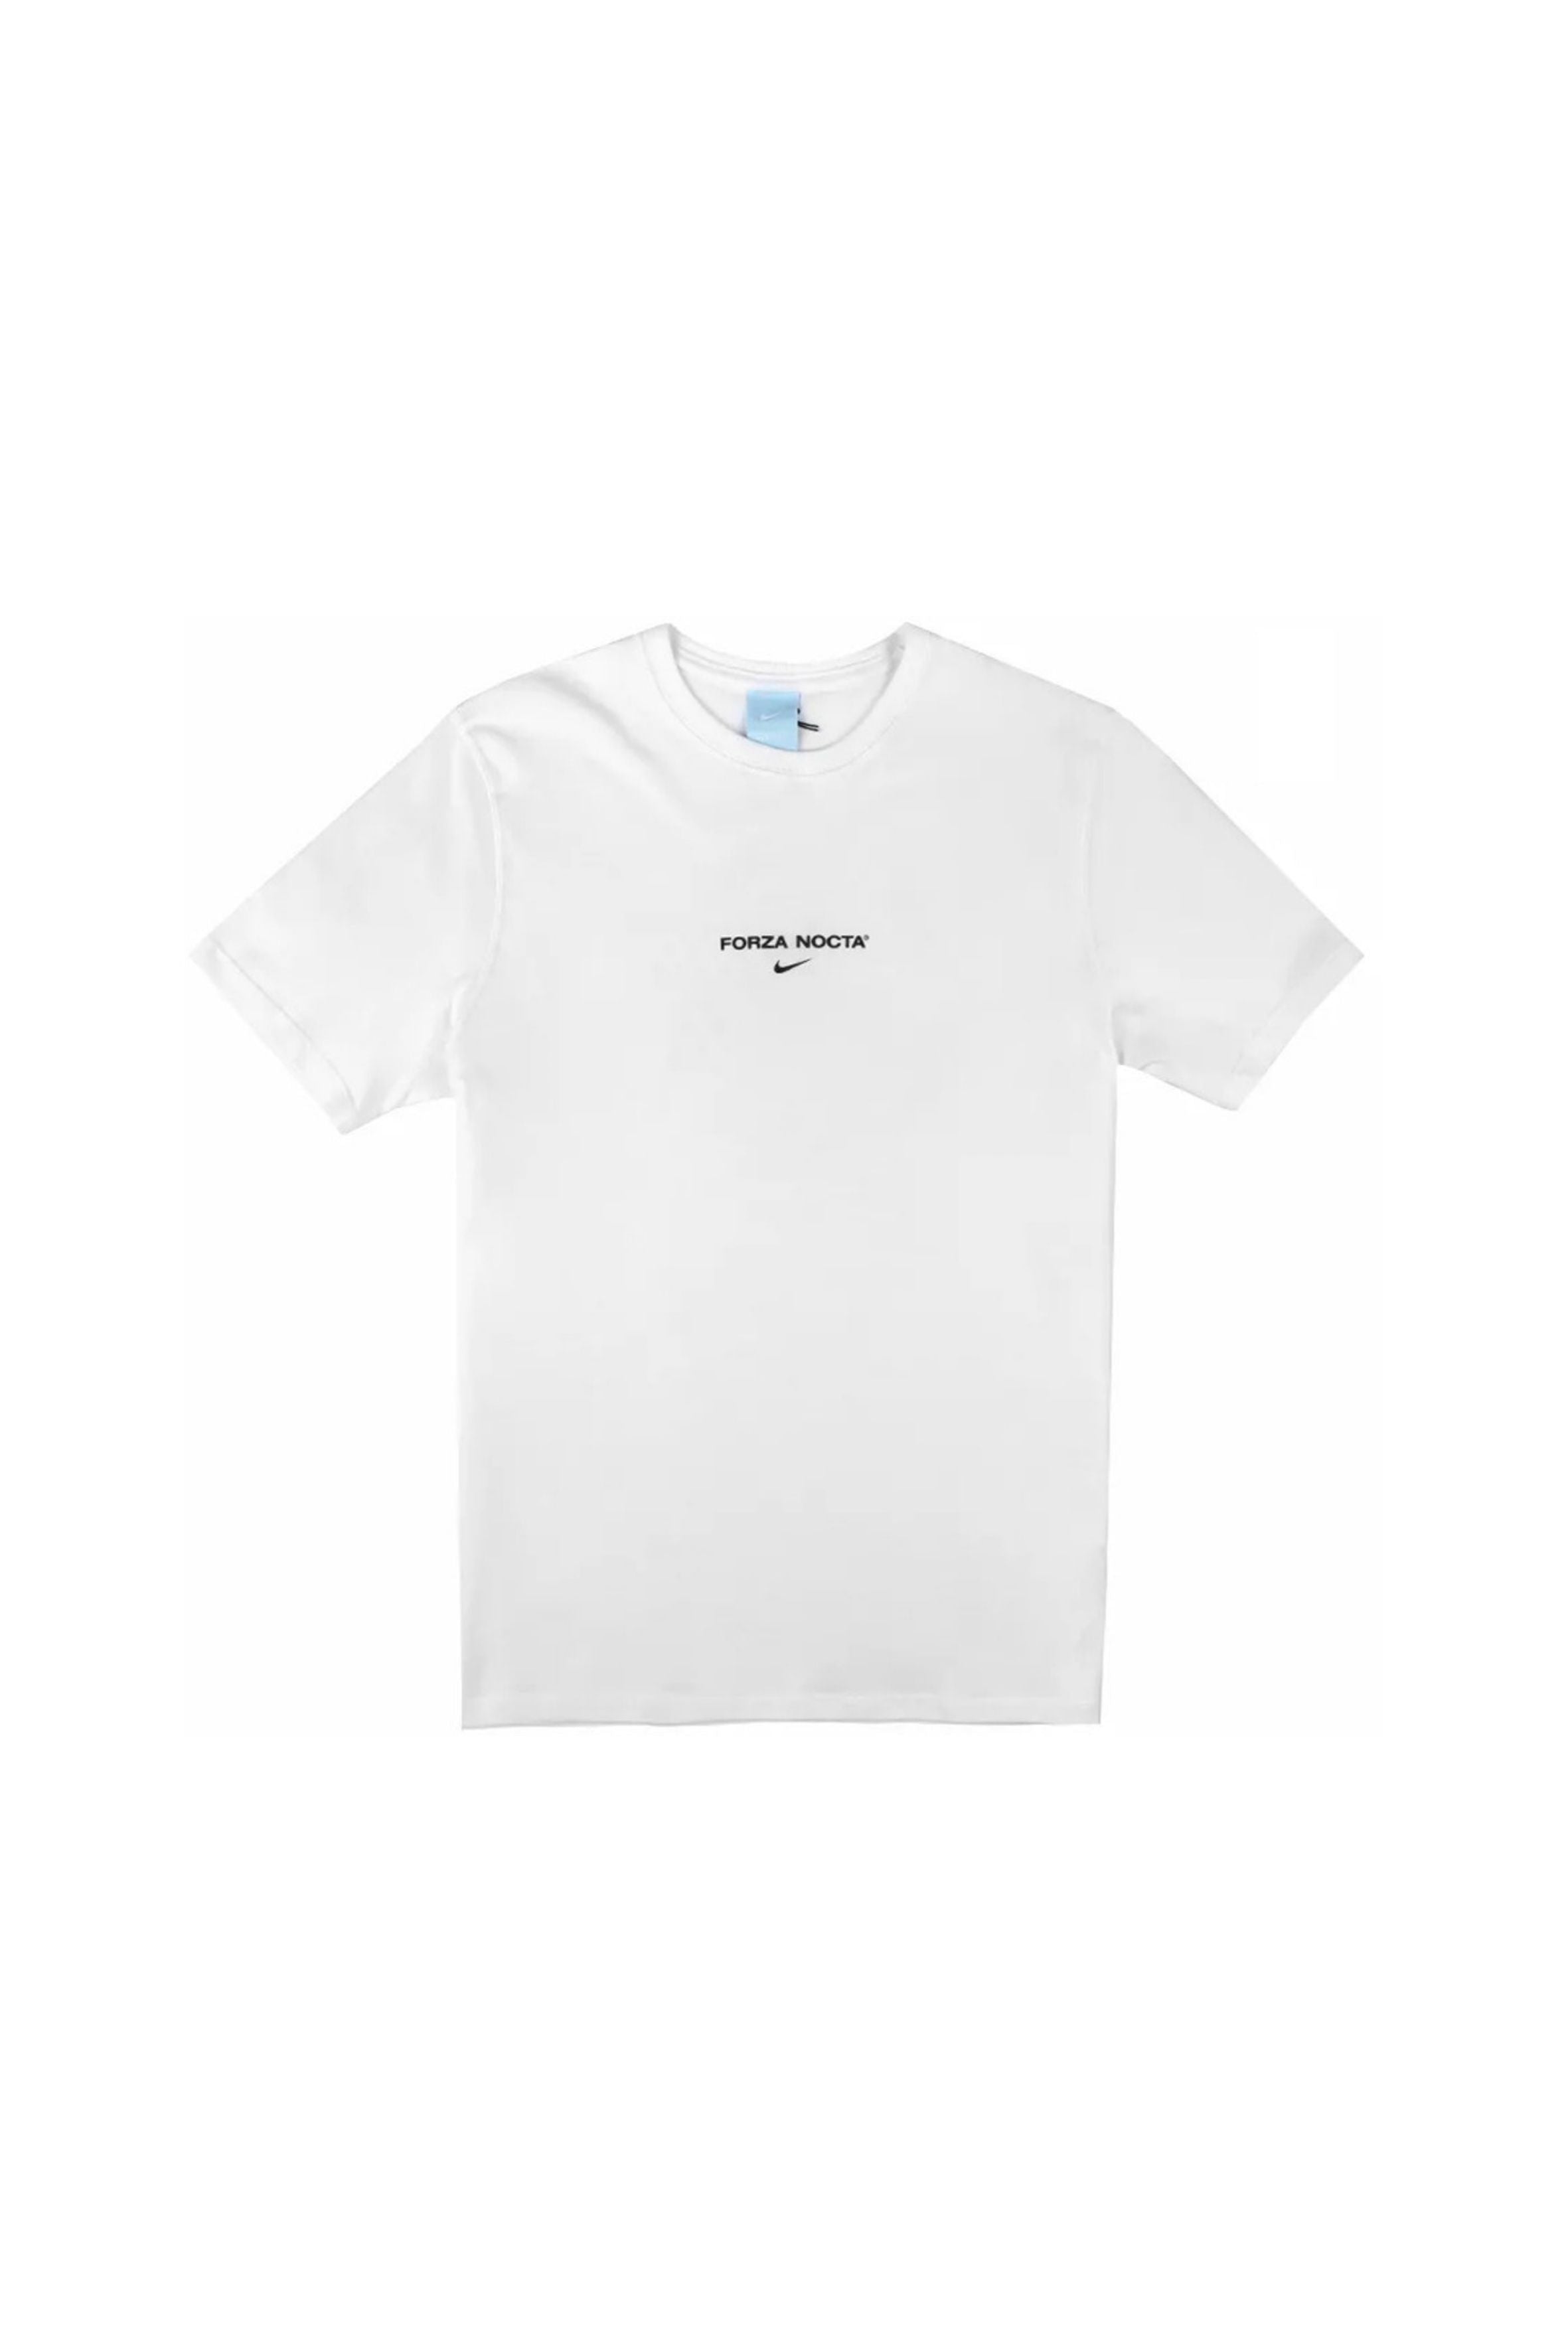 Nike x Drake NOCTA T-Shirt White – Curated by Charbel